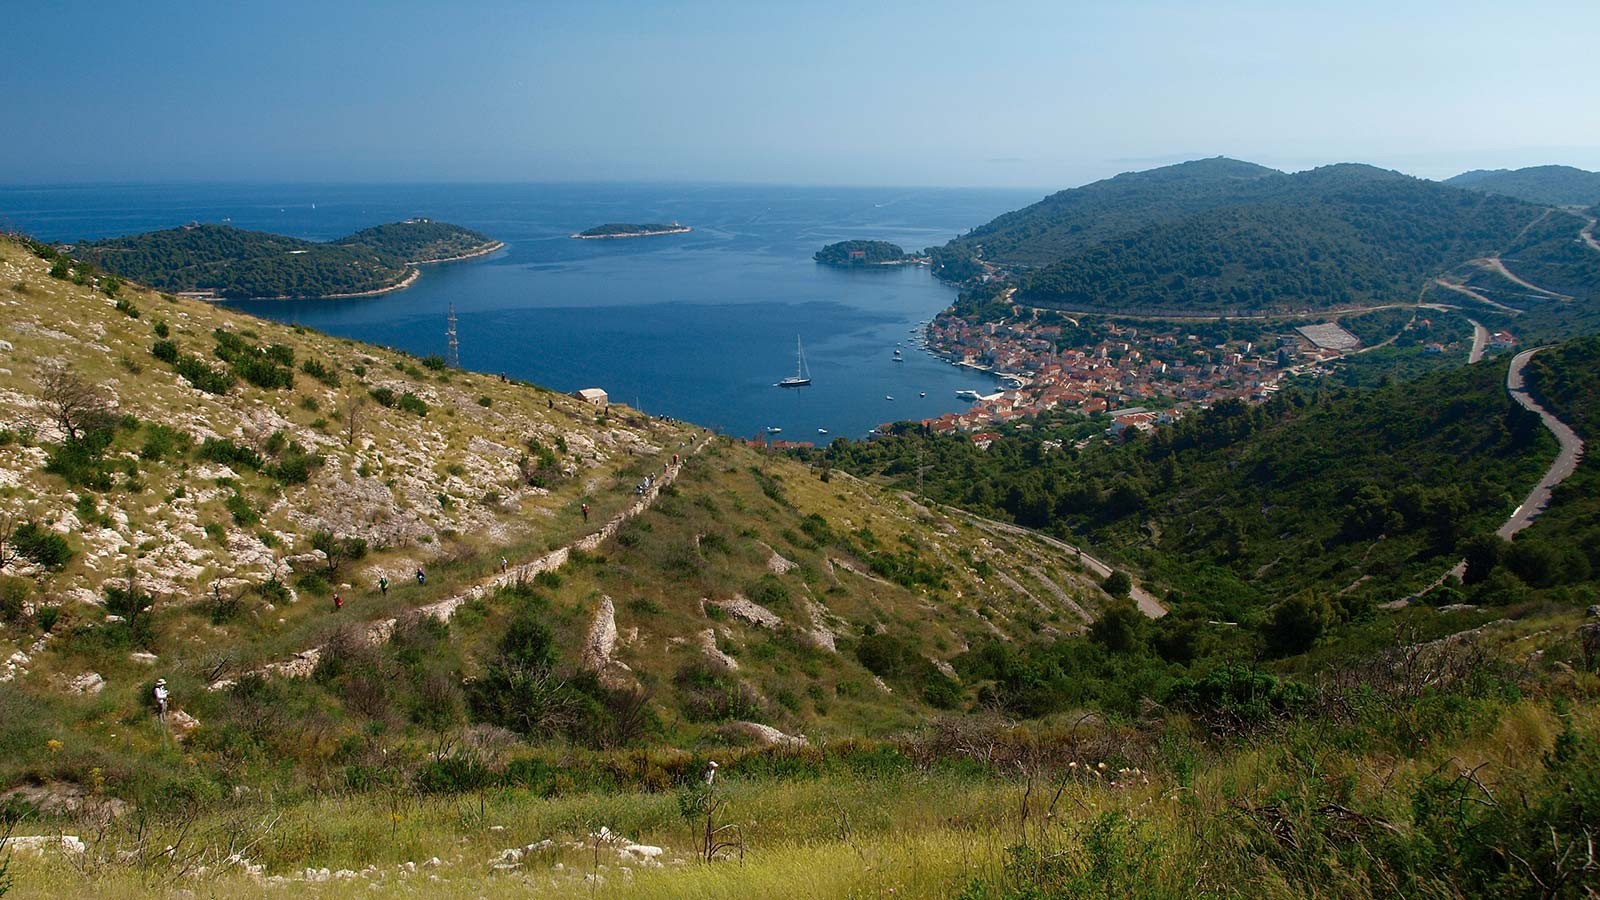 Vis Croatia is one of the 2019 newsworthy destinations on TravelSquire.com